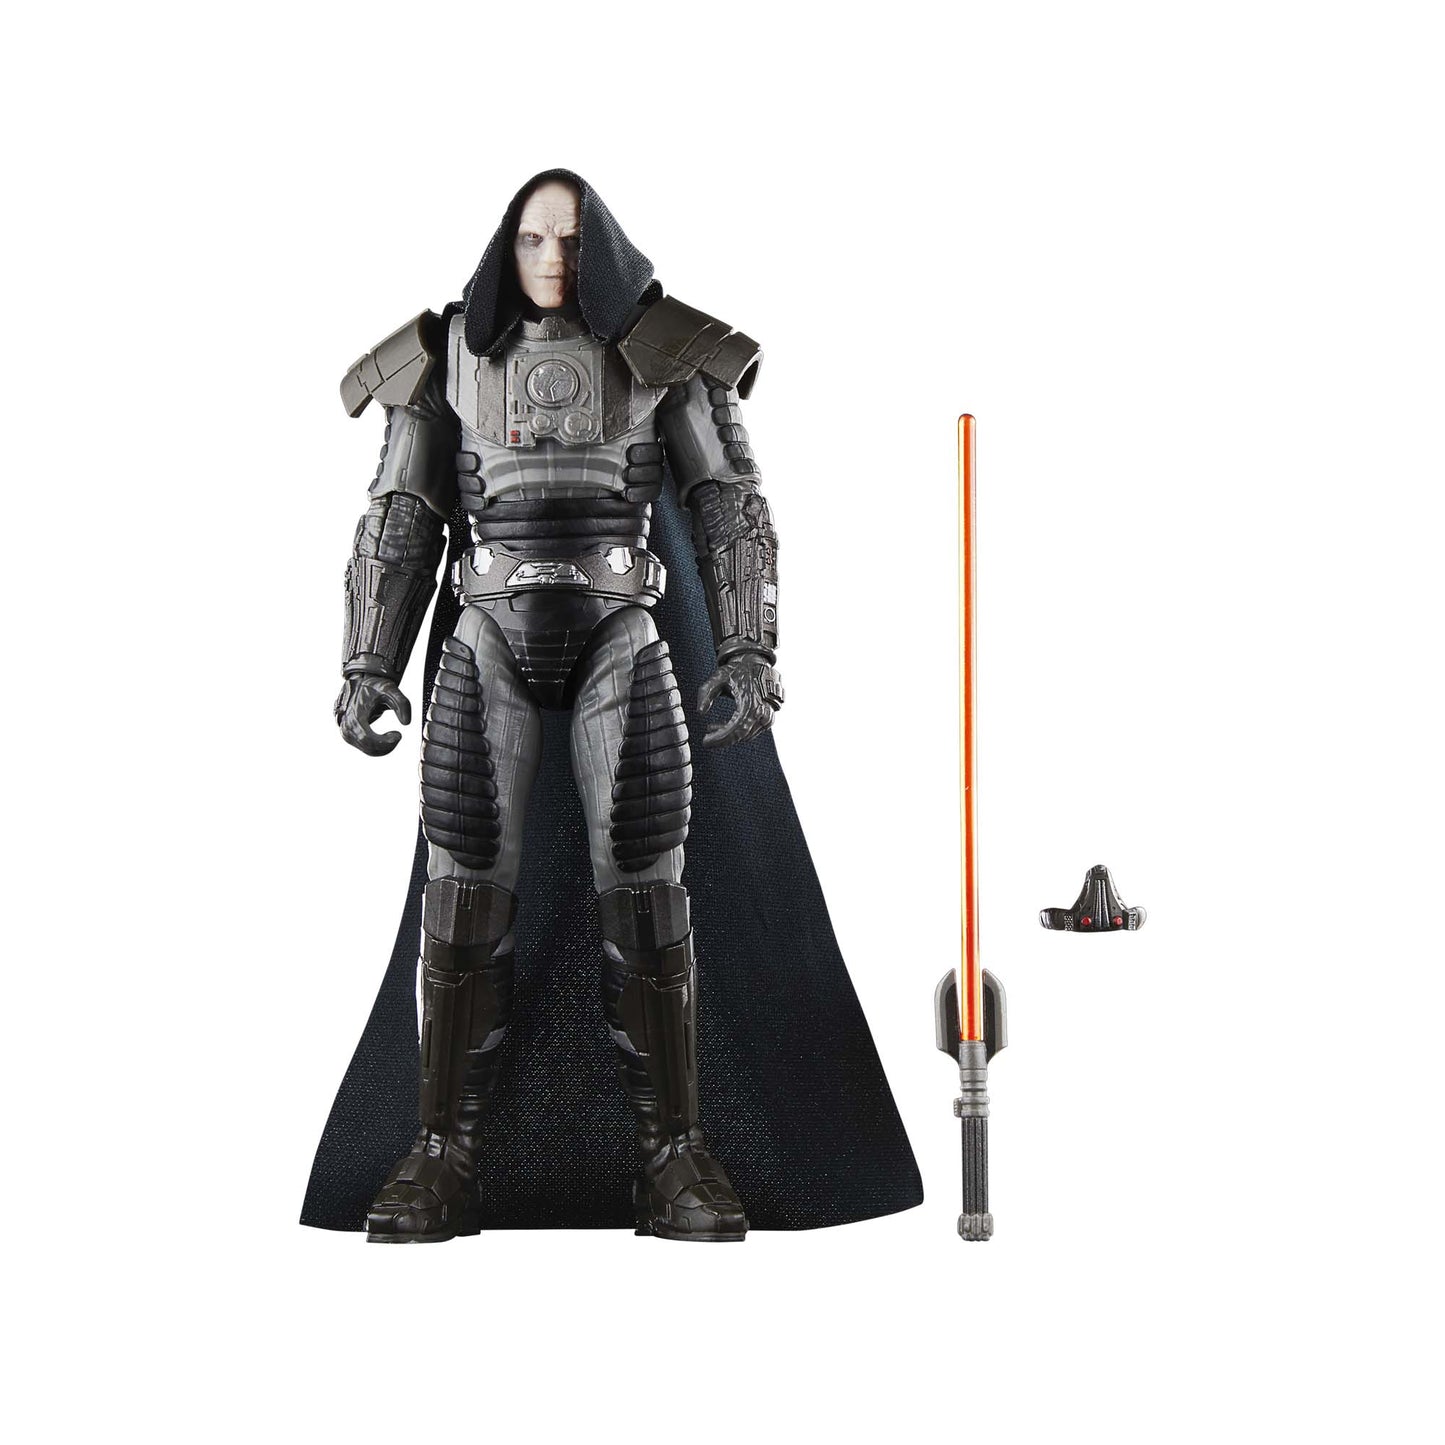 Star Wars The Black Series Darth Malgus Action Figure Toy with accessories - Heretoserveyou